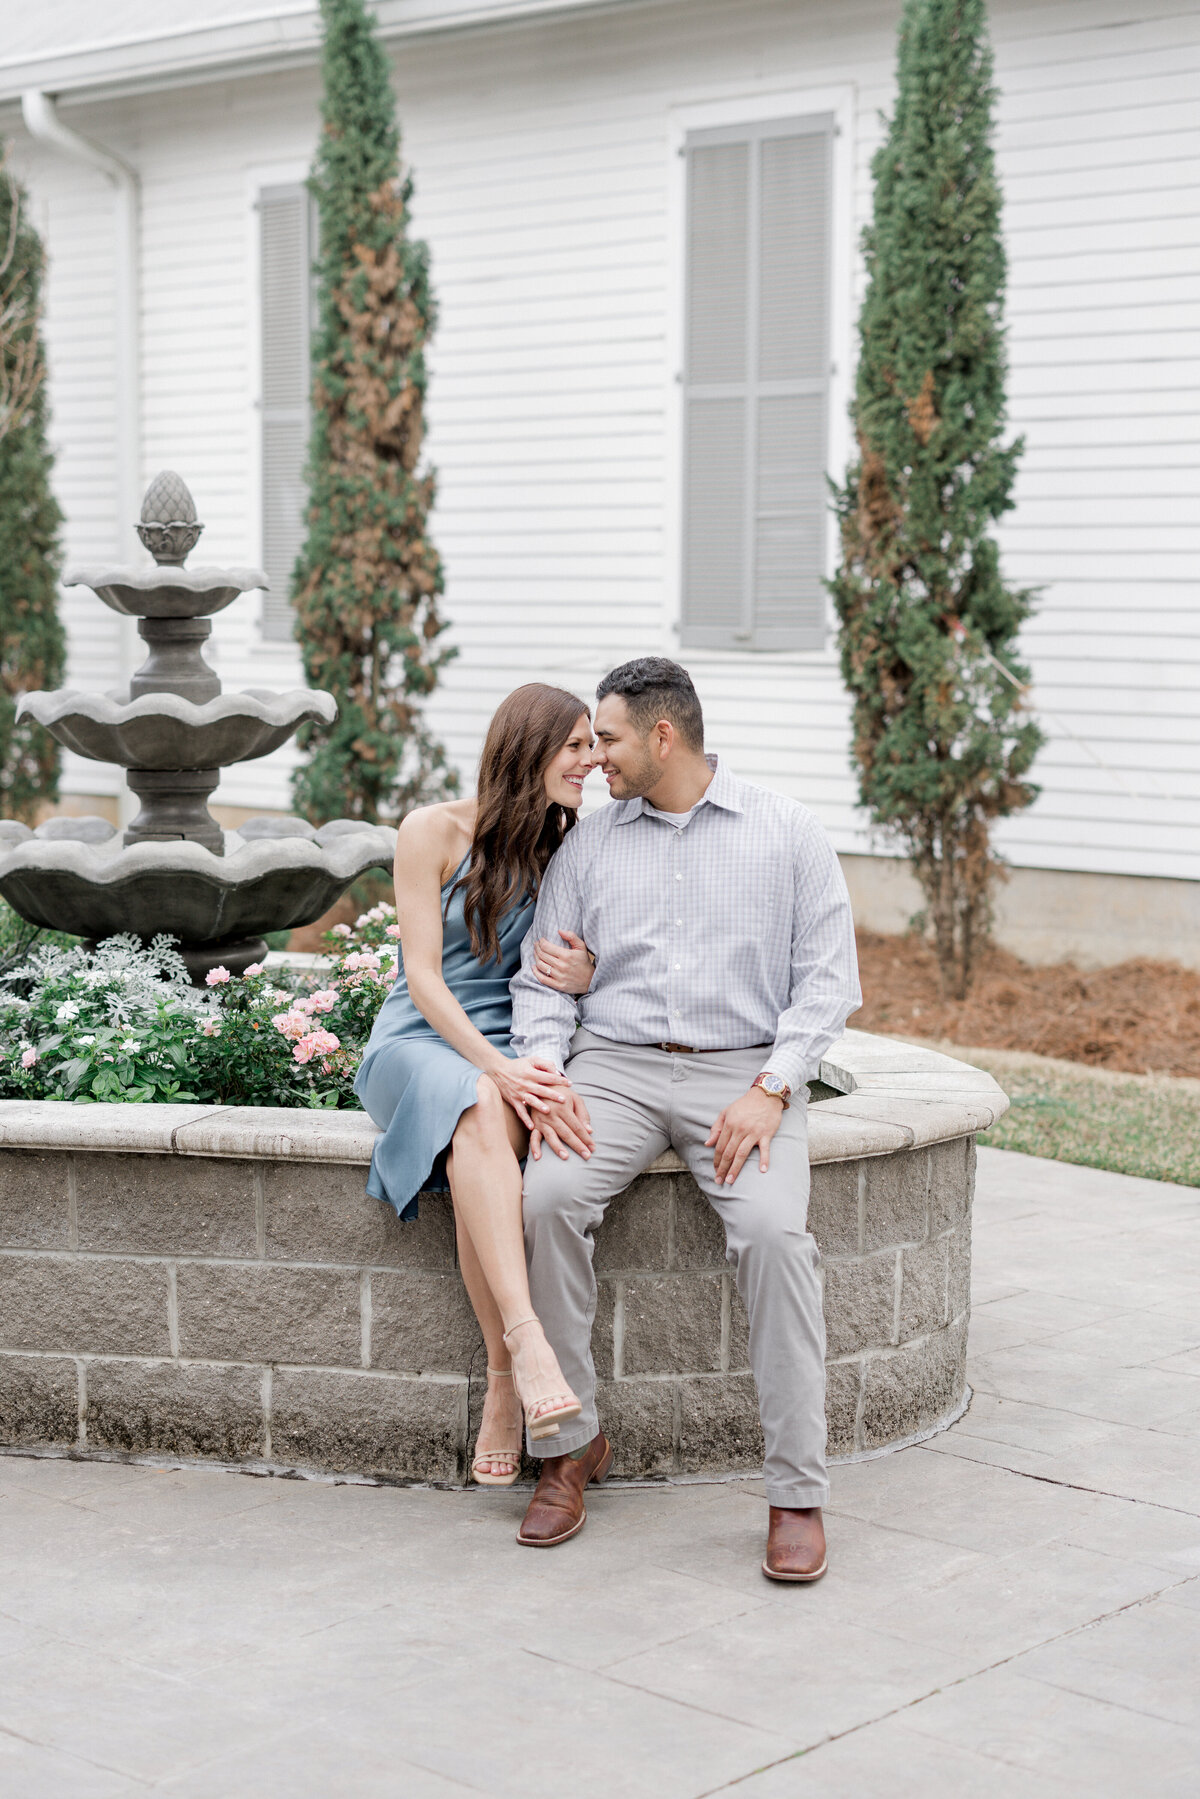 Jessie Newton Photography-Alex and Kristen Engagements-Ocean Springs, MS-79